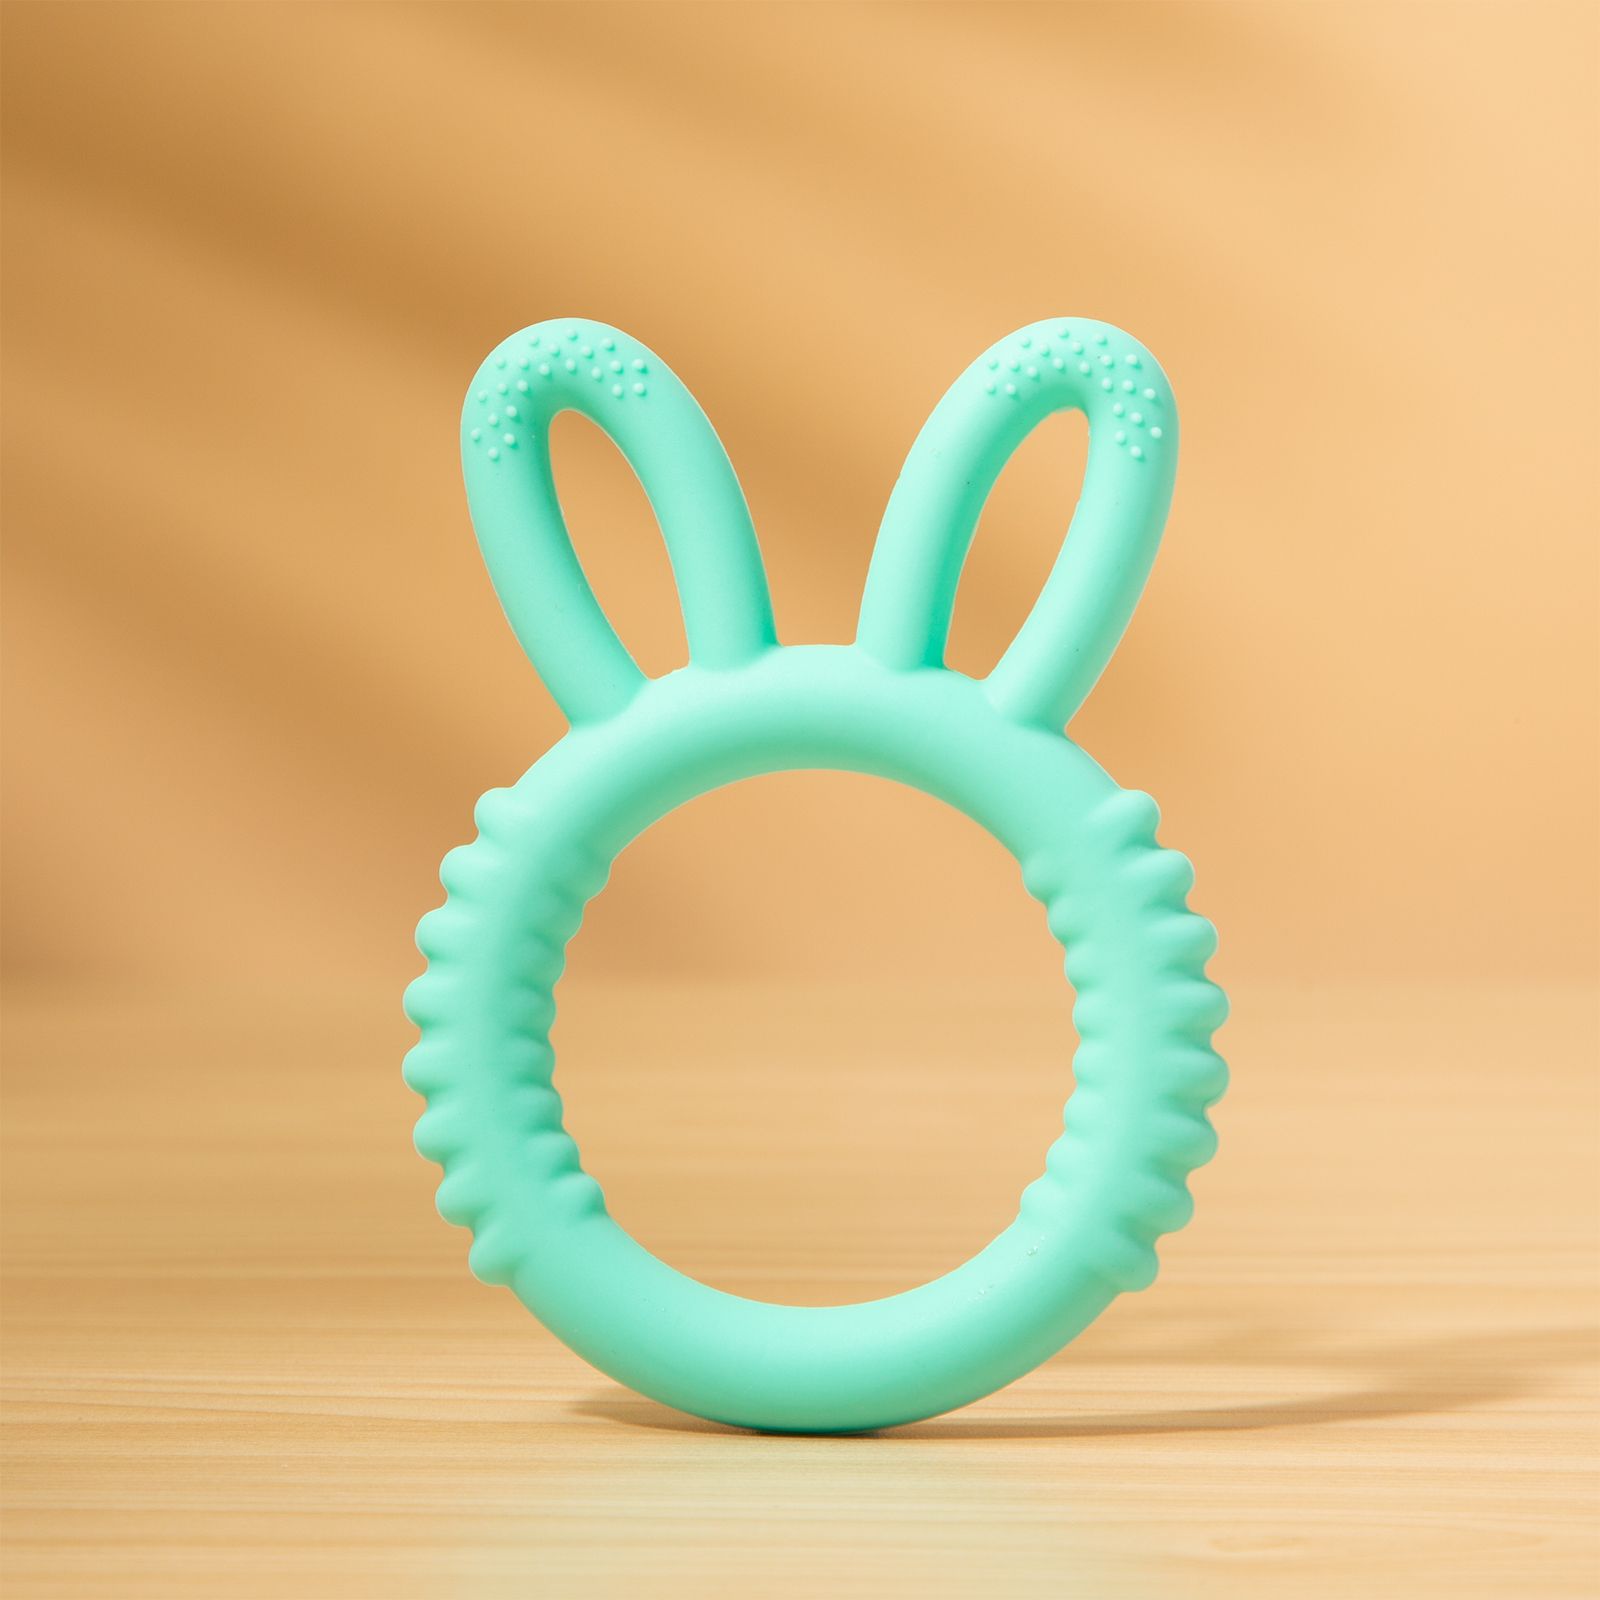 100% Food-Grade Materials BPA-Free Rabbit Ears Silicone Teething Toy For Babies